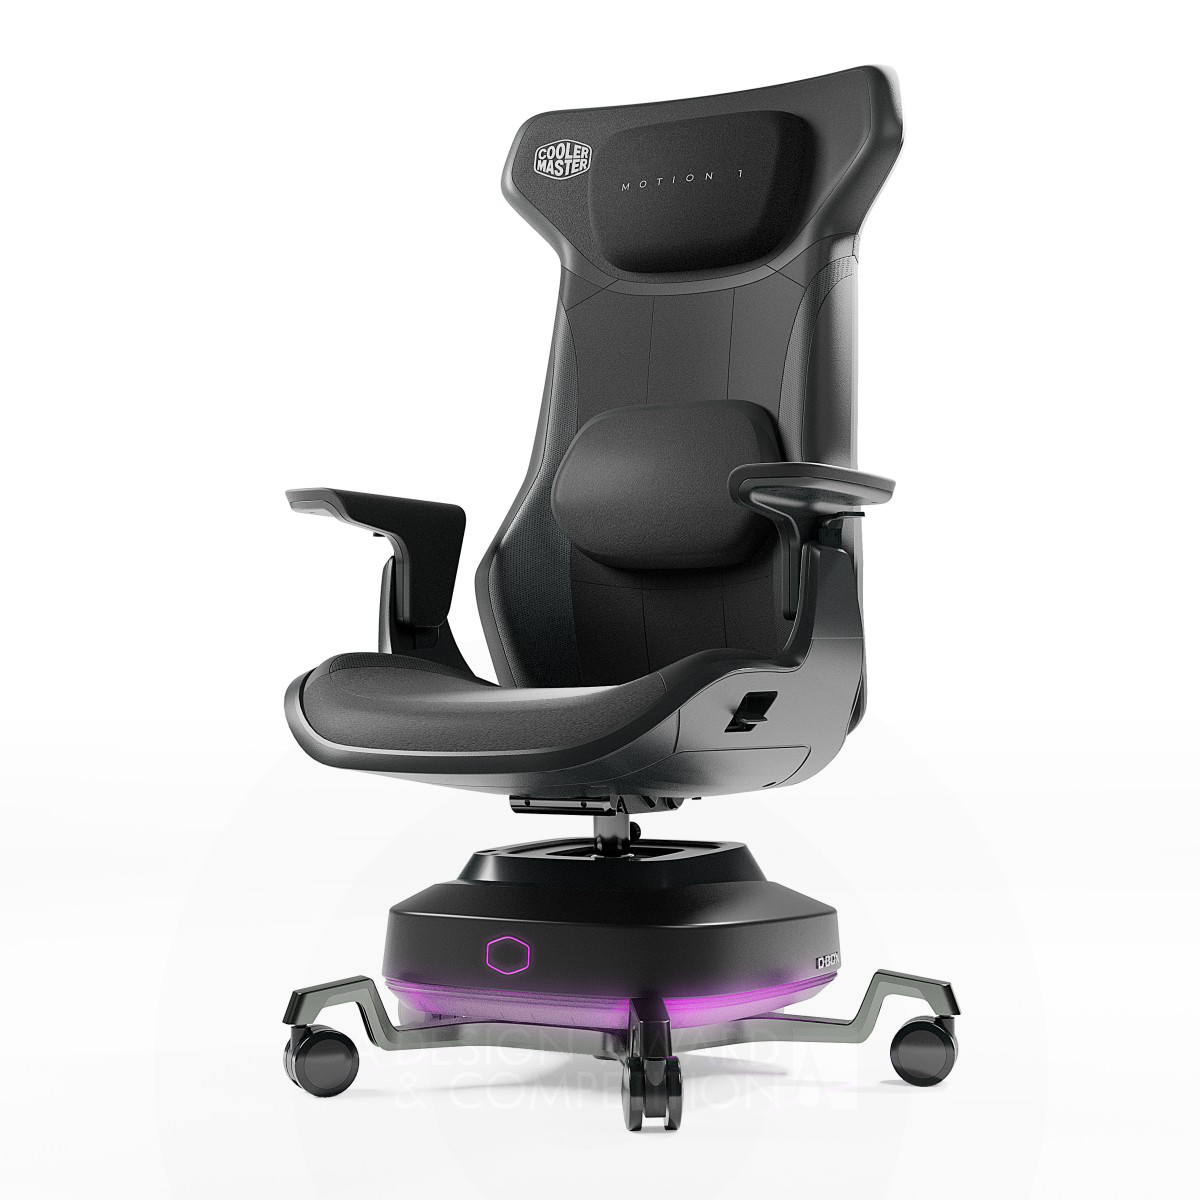 Cooler Master Motion 1 Haptic Gaming Chair